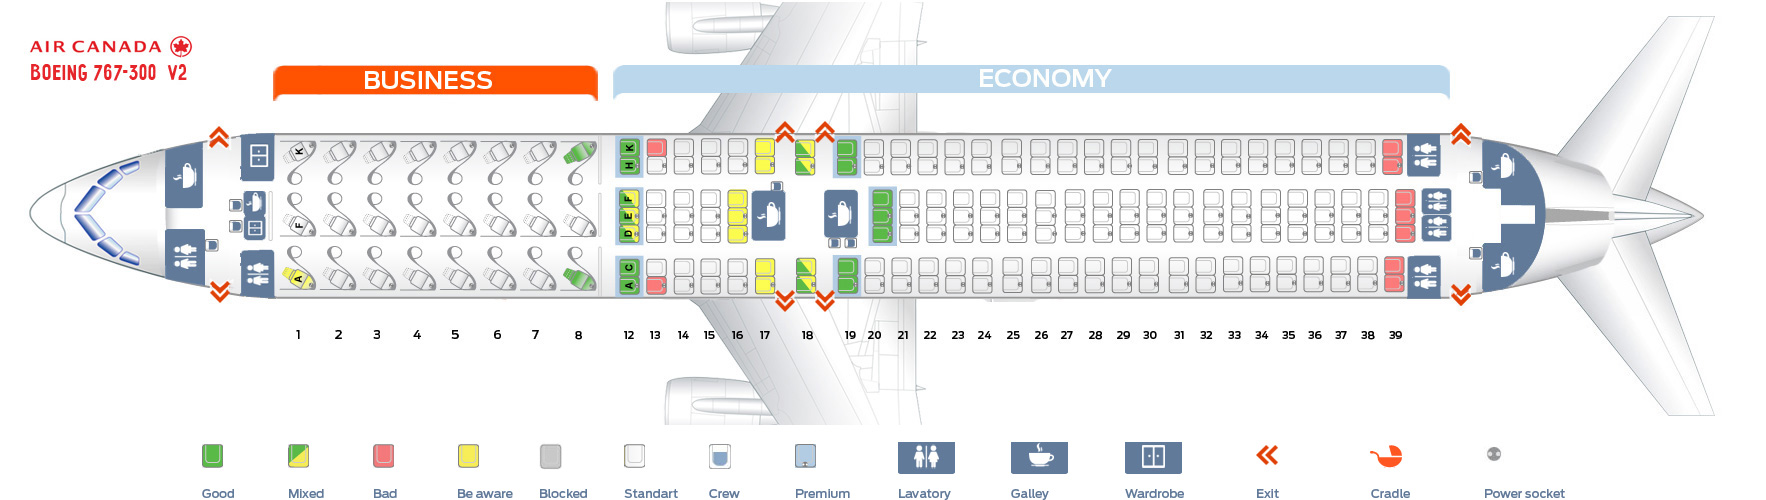 Boeing 763 Seating Chart Air Canada